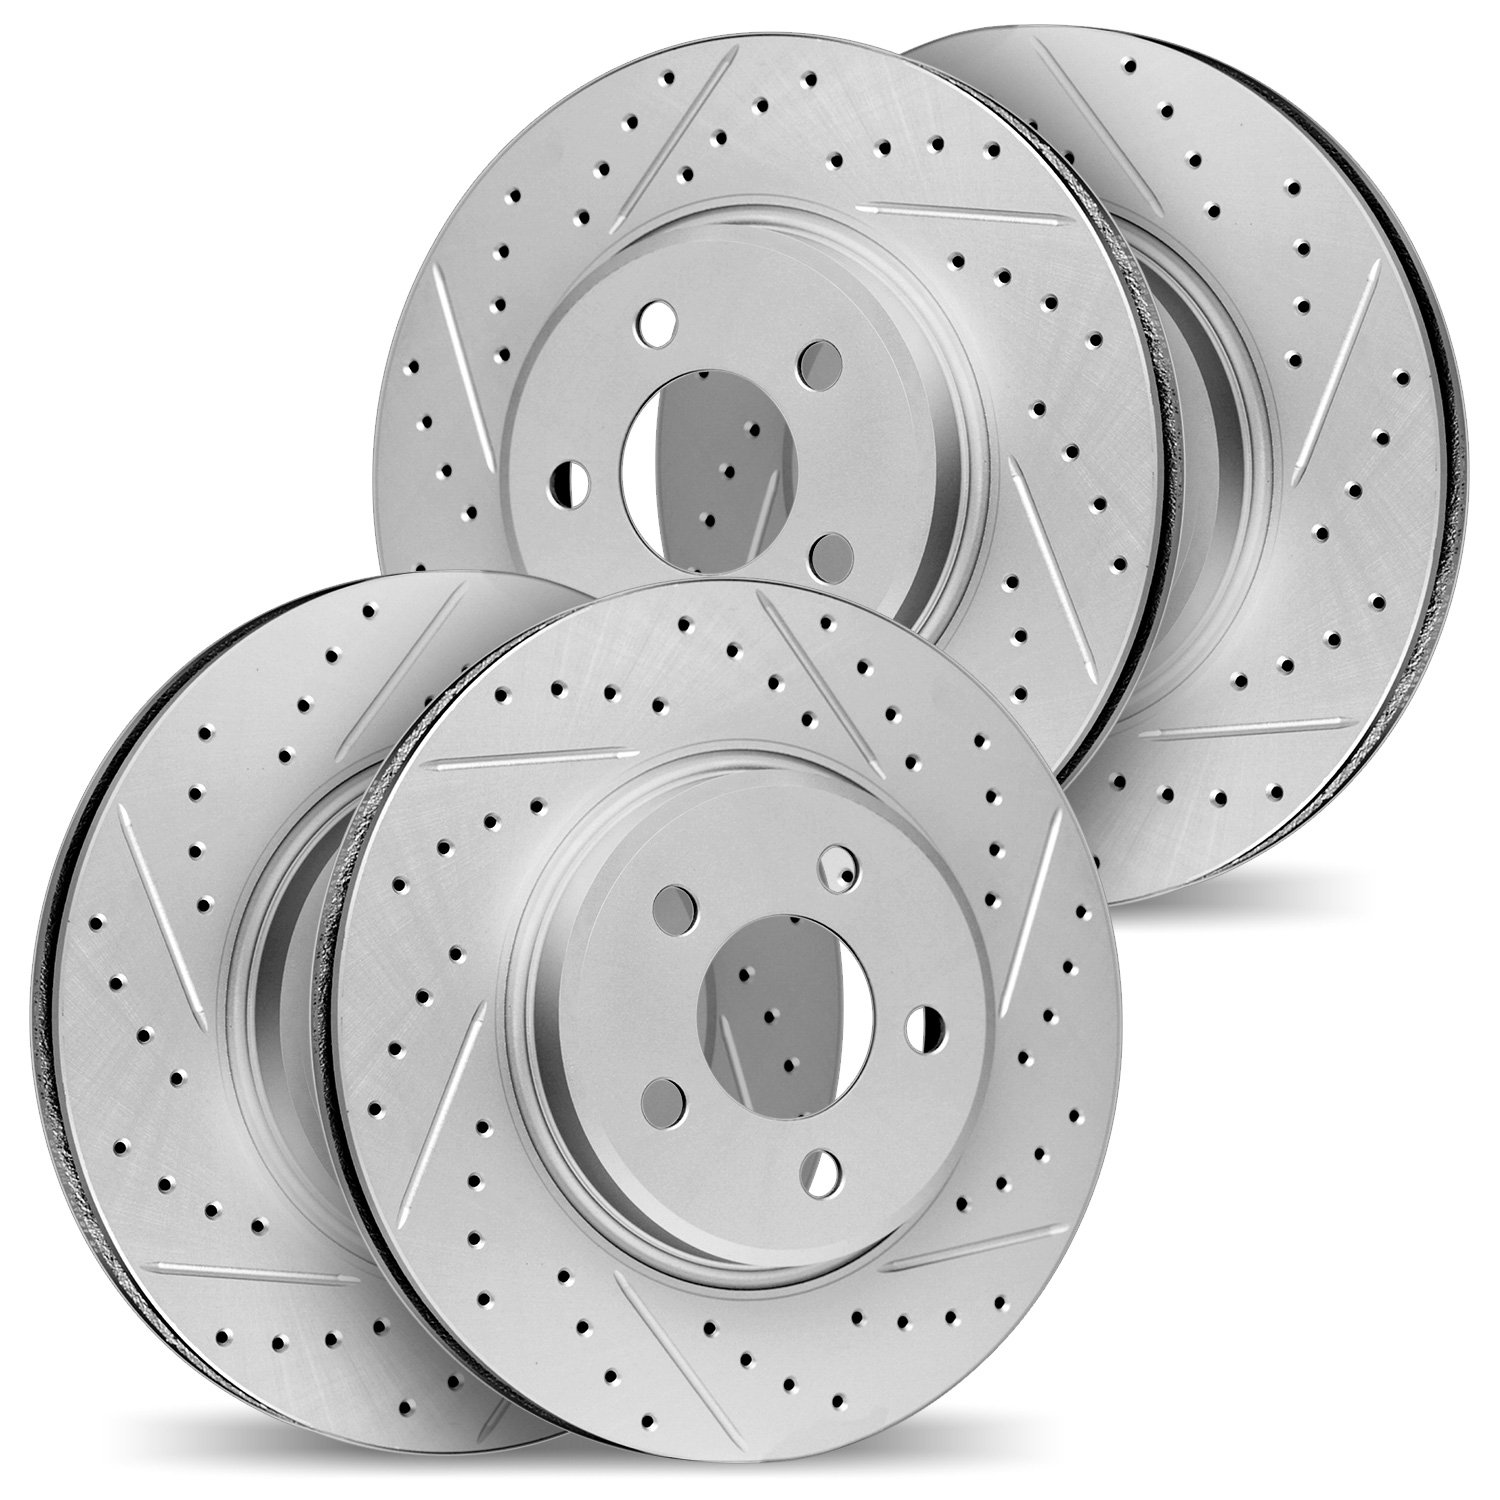 2004-76013 Geoperformance Drilled/Slotted Brake Rotors, Fits Select Lexus/Toyota/Scion, Position: Front and Rear